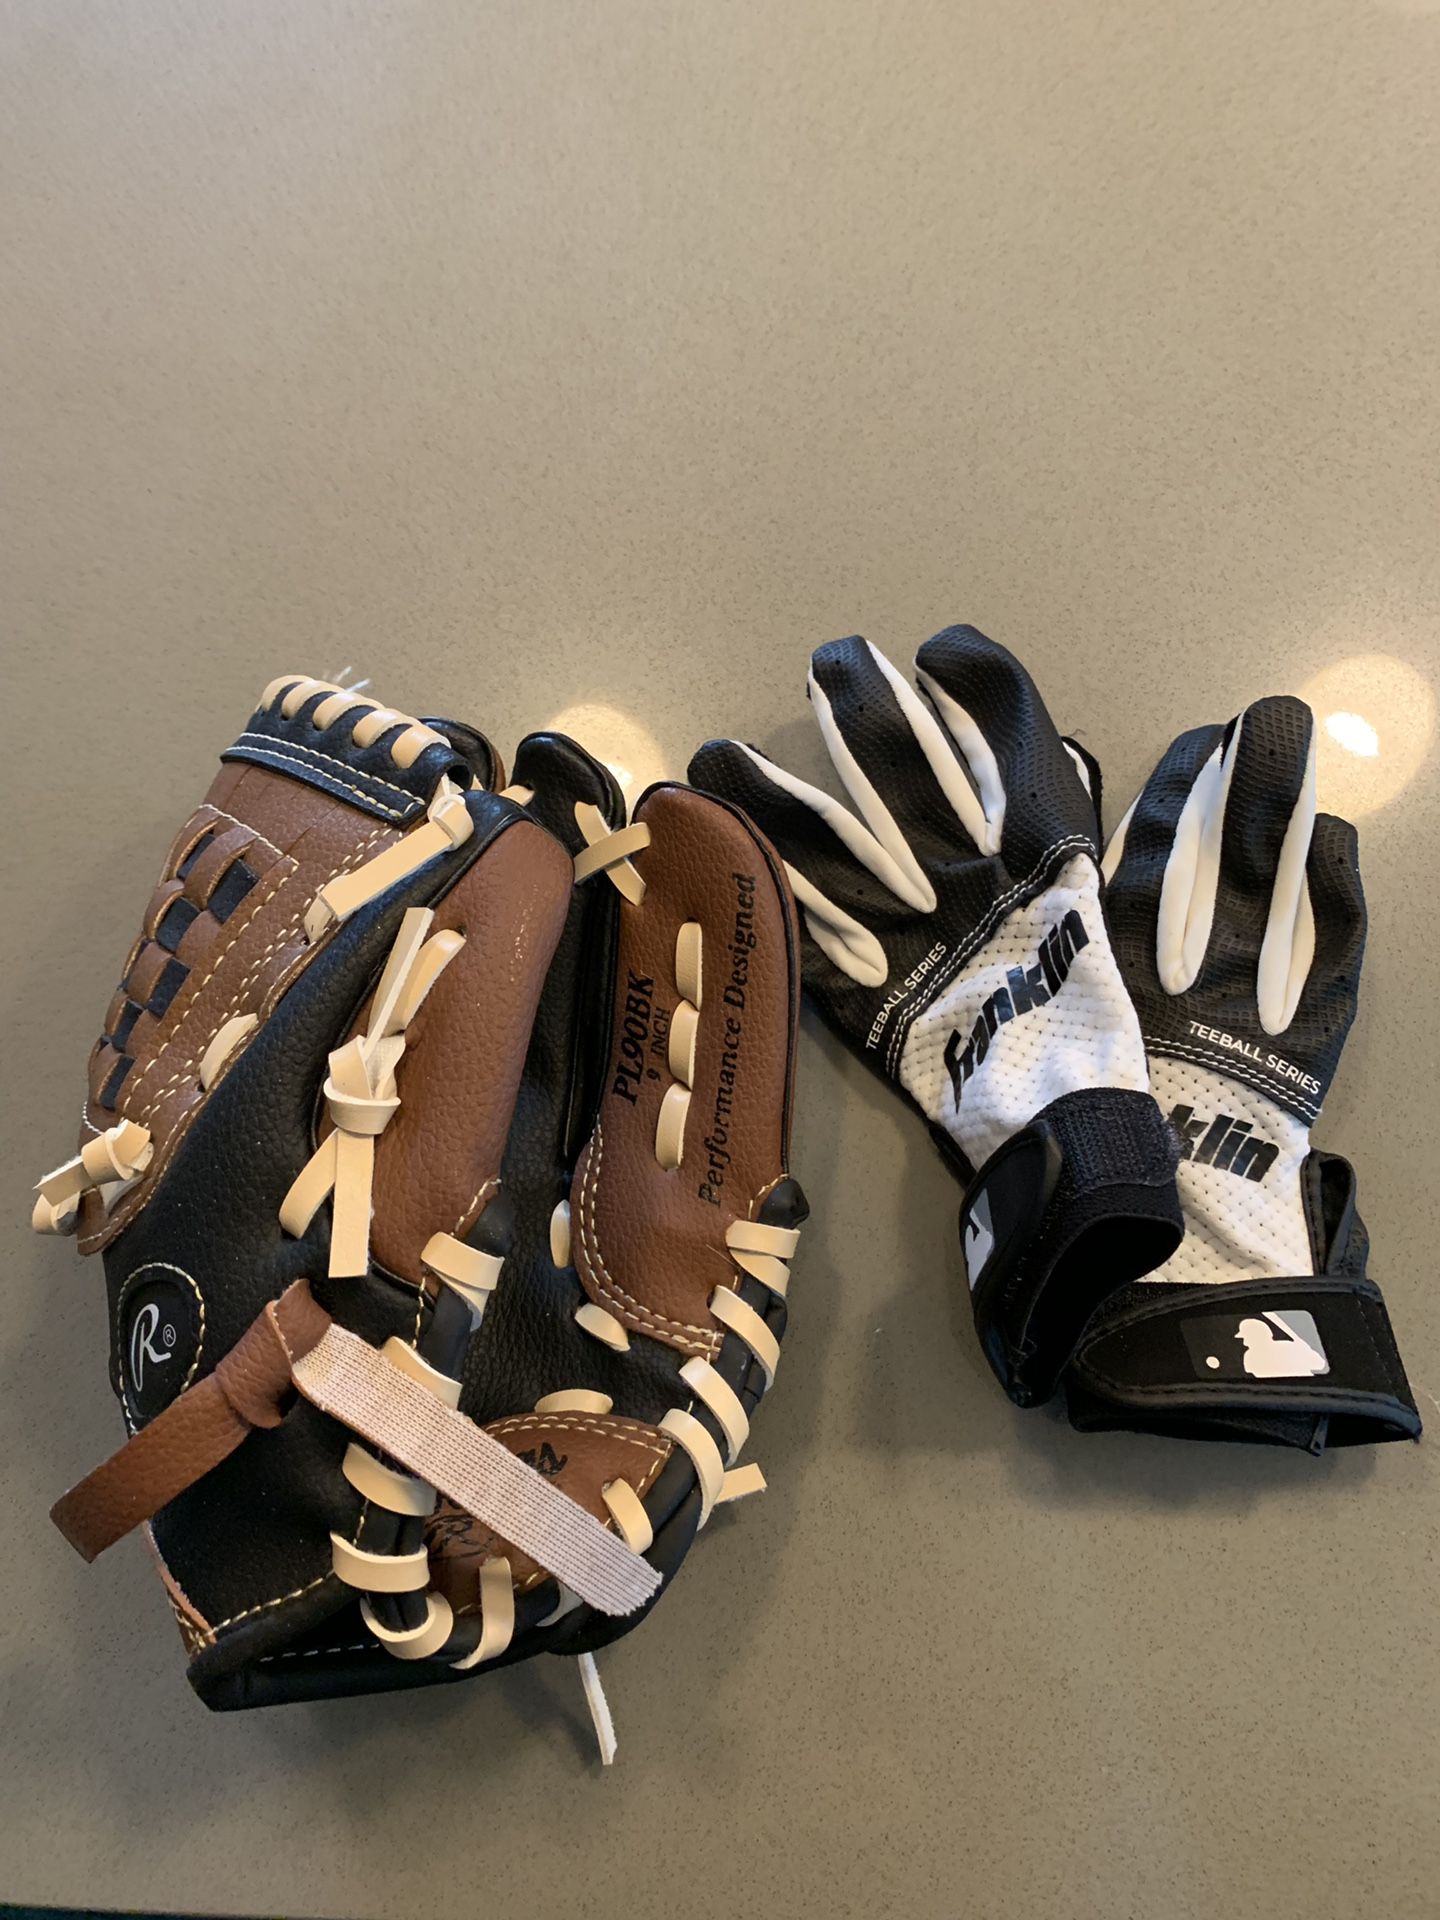 PL 90 BK 9 inch baseball mitt and gloves (4 year old)